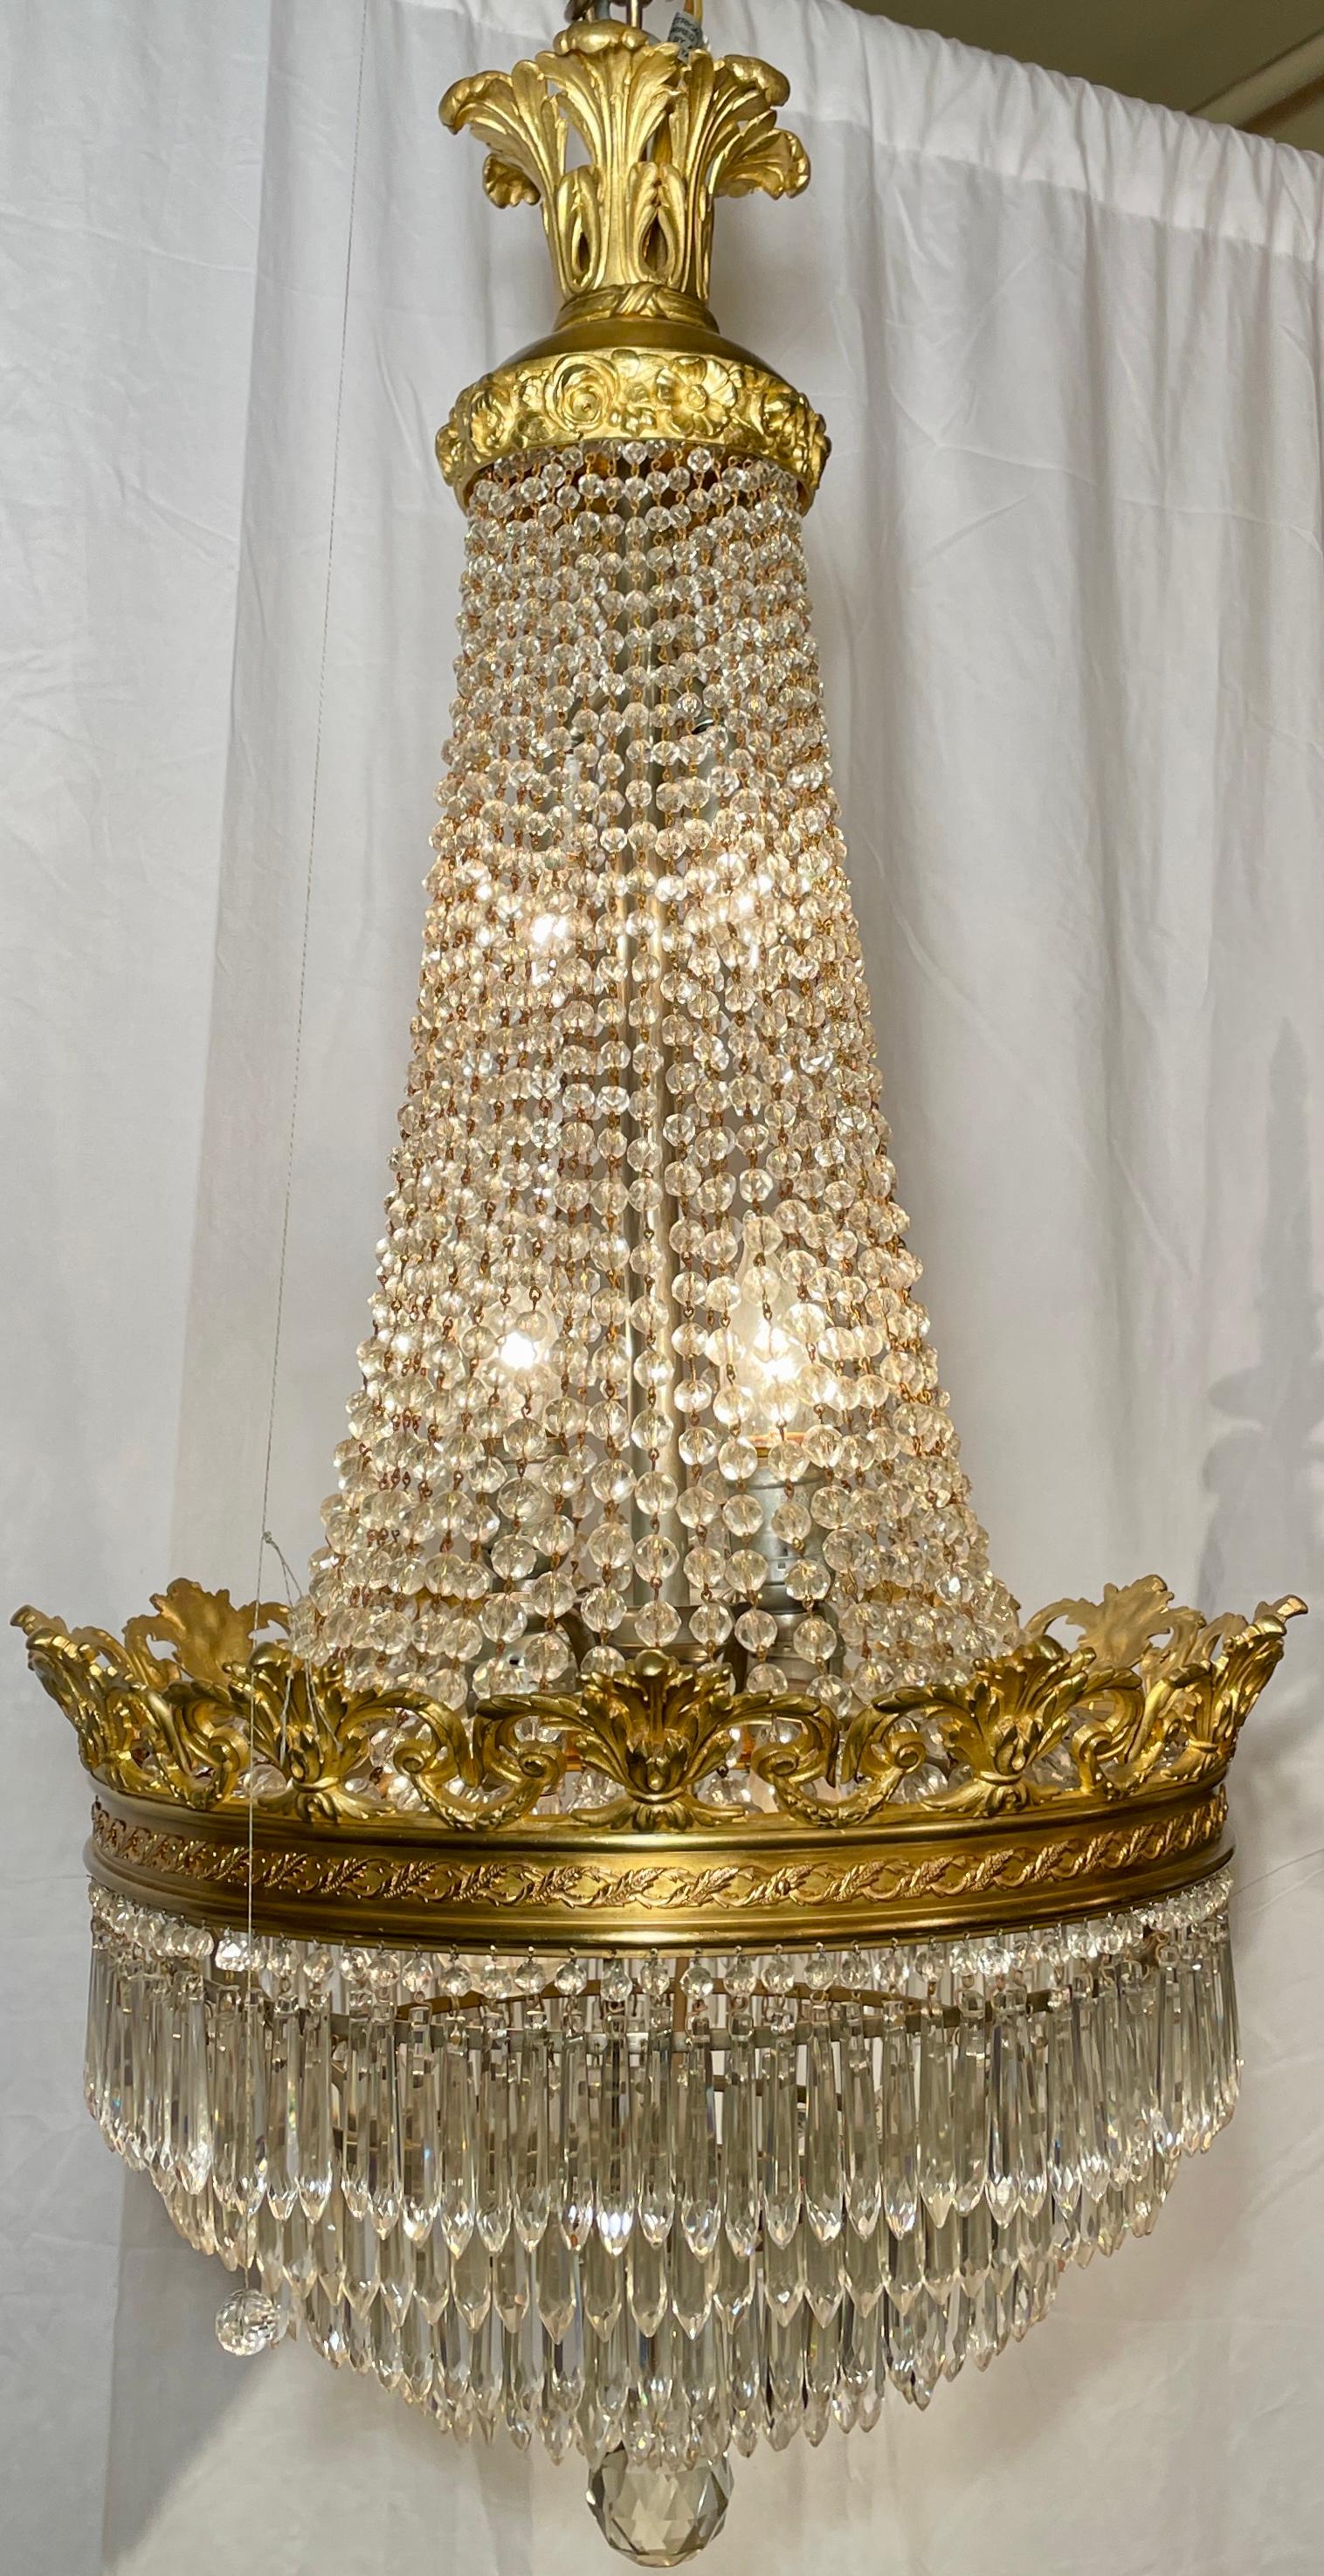 Antique French Richly Draped Baccarat crystal and gold bronze chandelier, Circa 1890s.